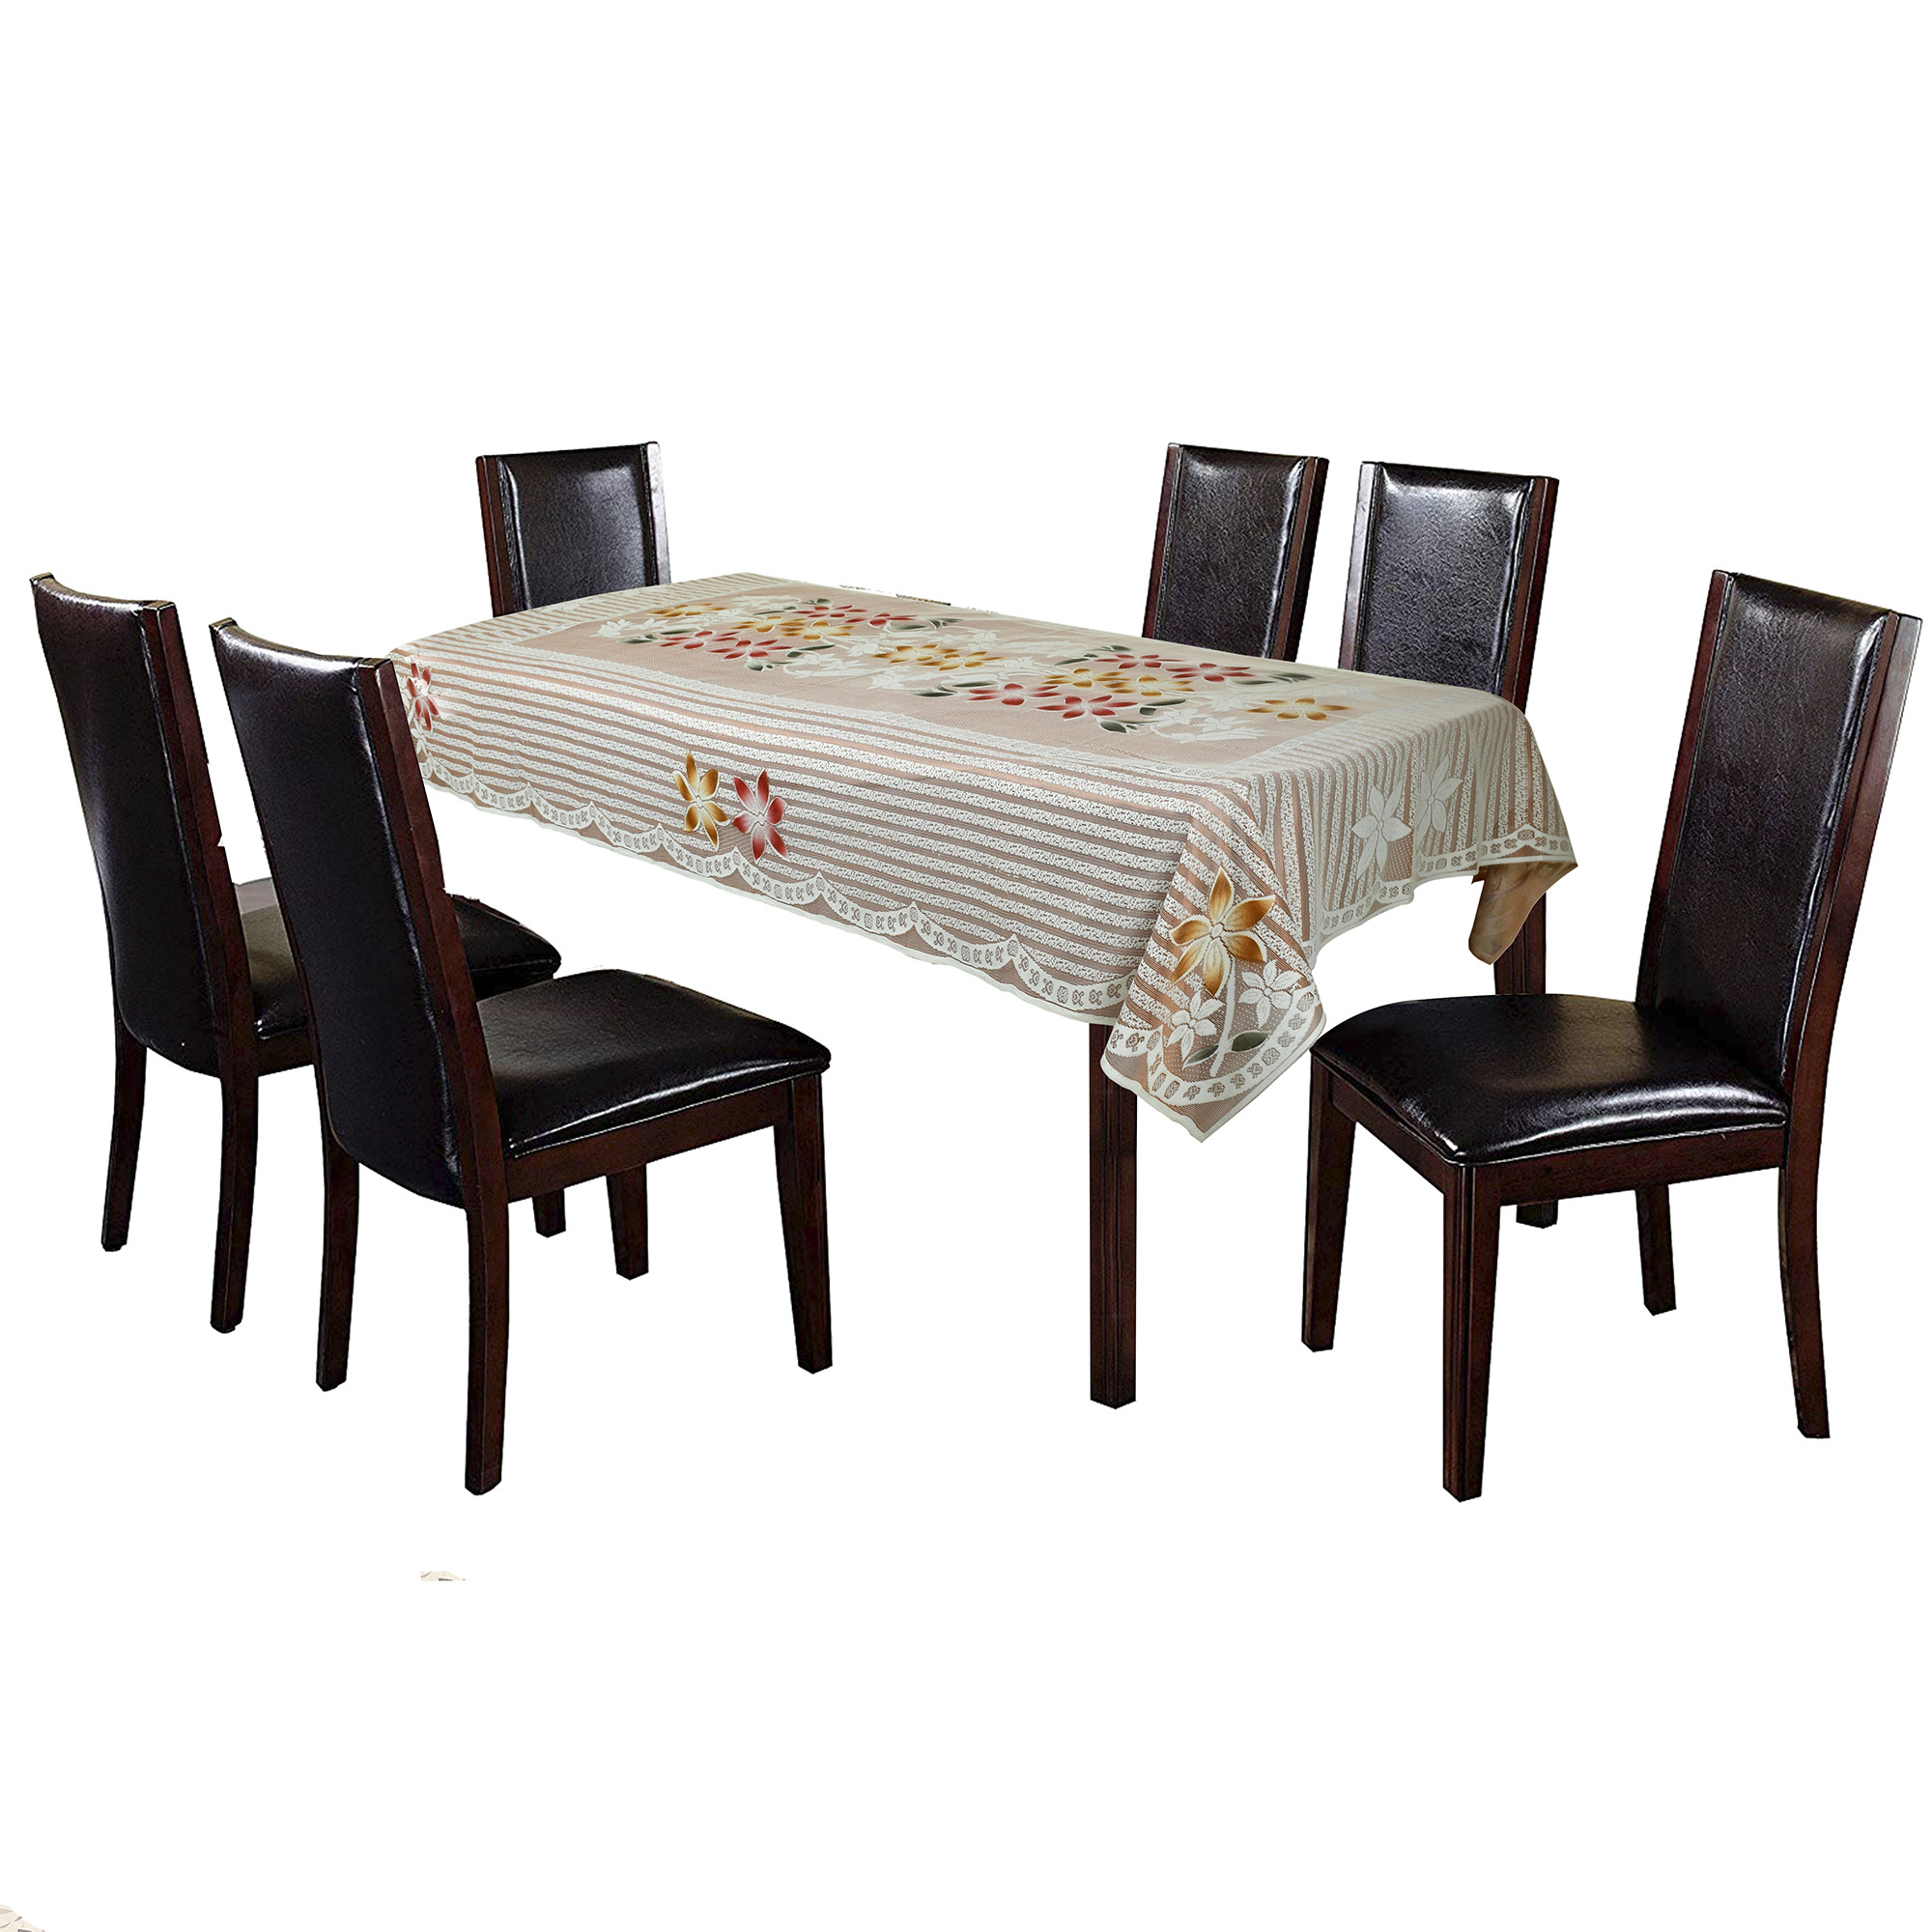 Kuber Industries Fruit Print Cotton 6 Seater Dining Table Cover 60